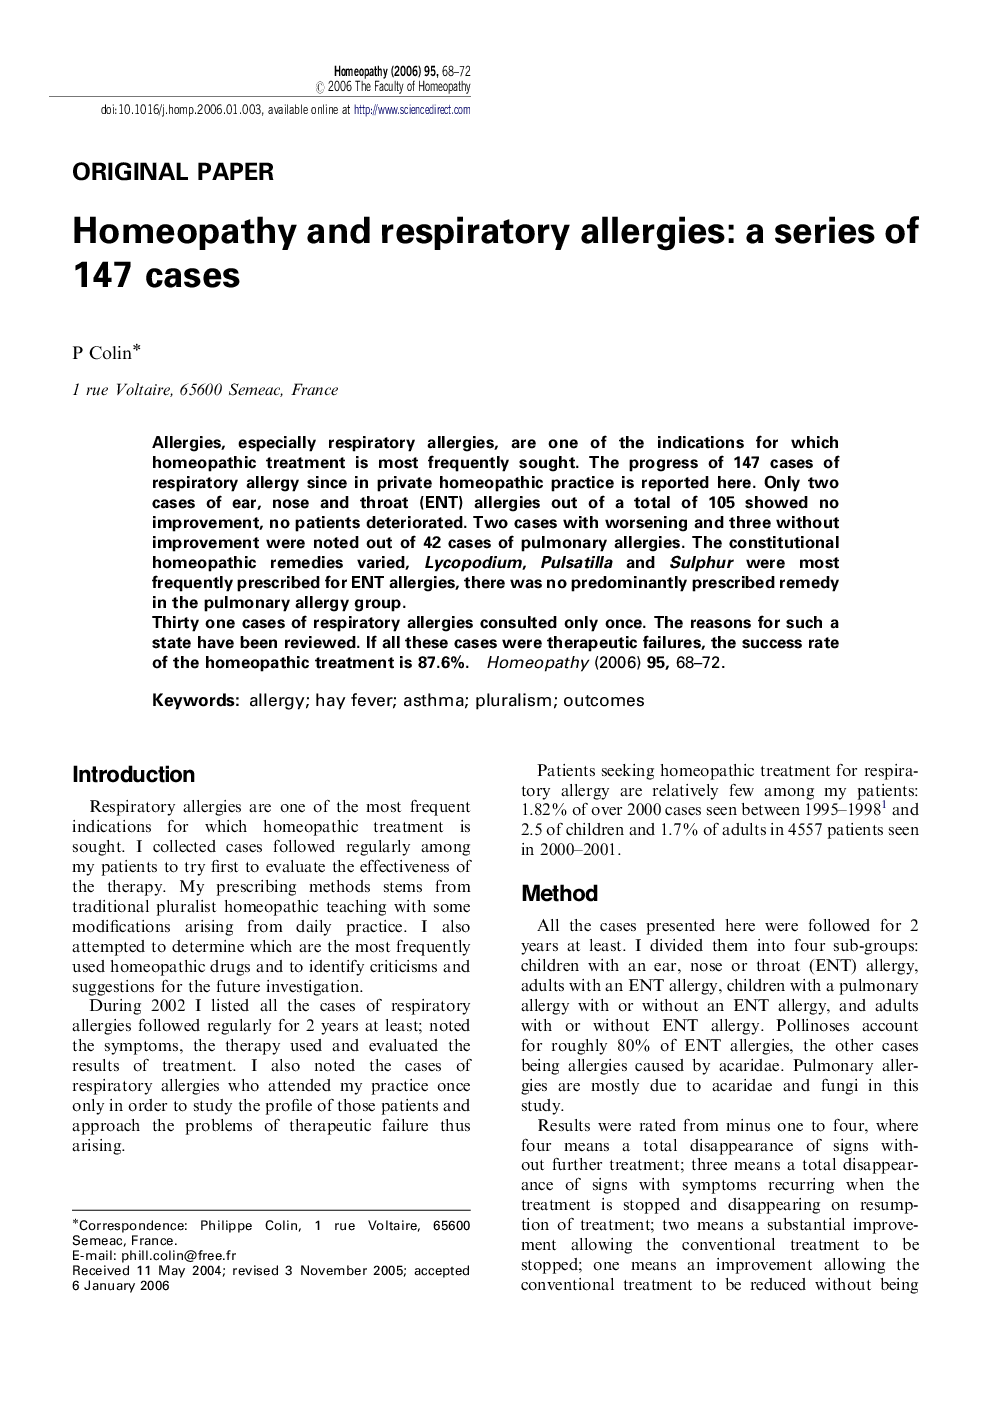 Homeopathy and respiratory allergies: a series of 147 cases